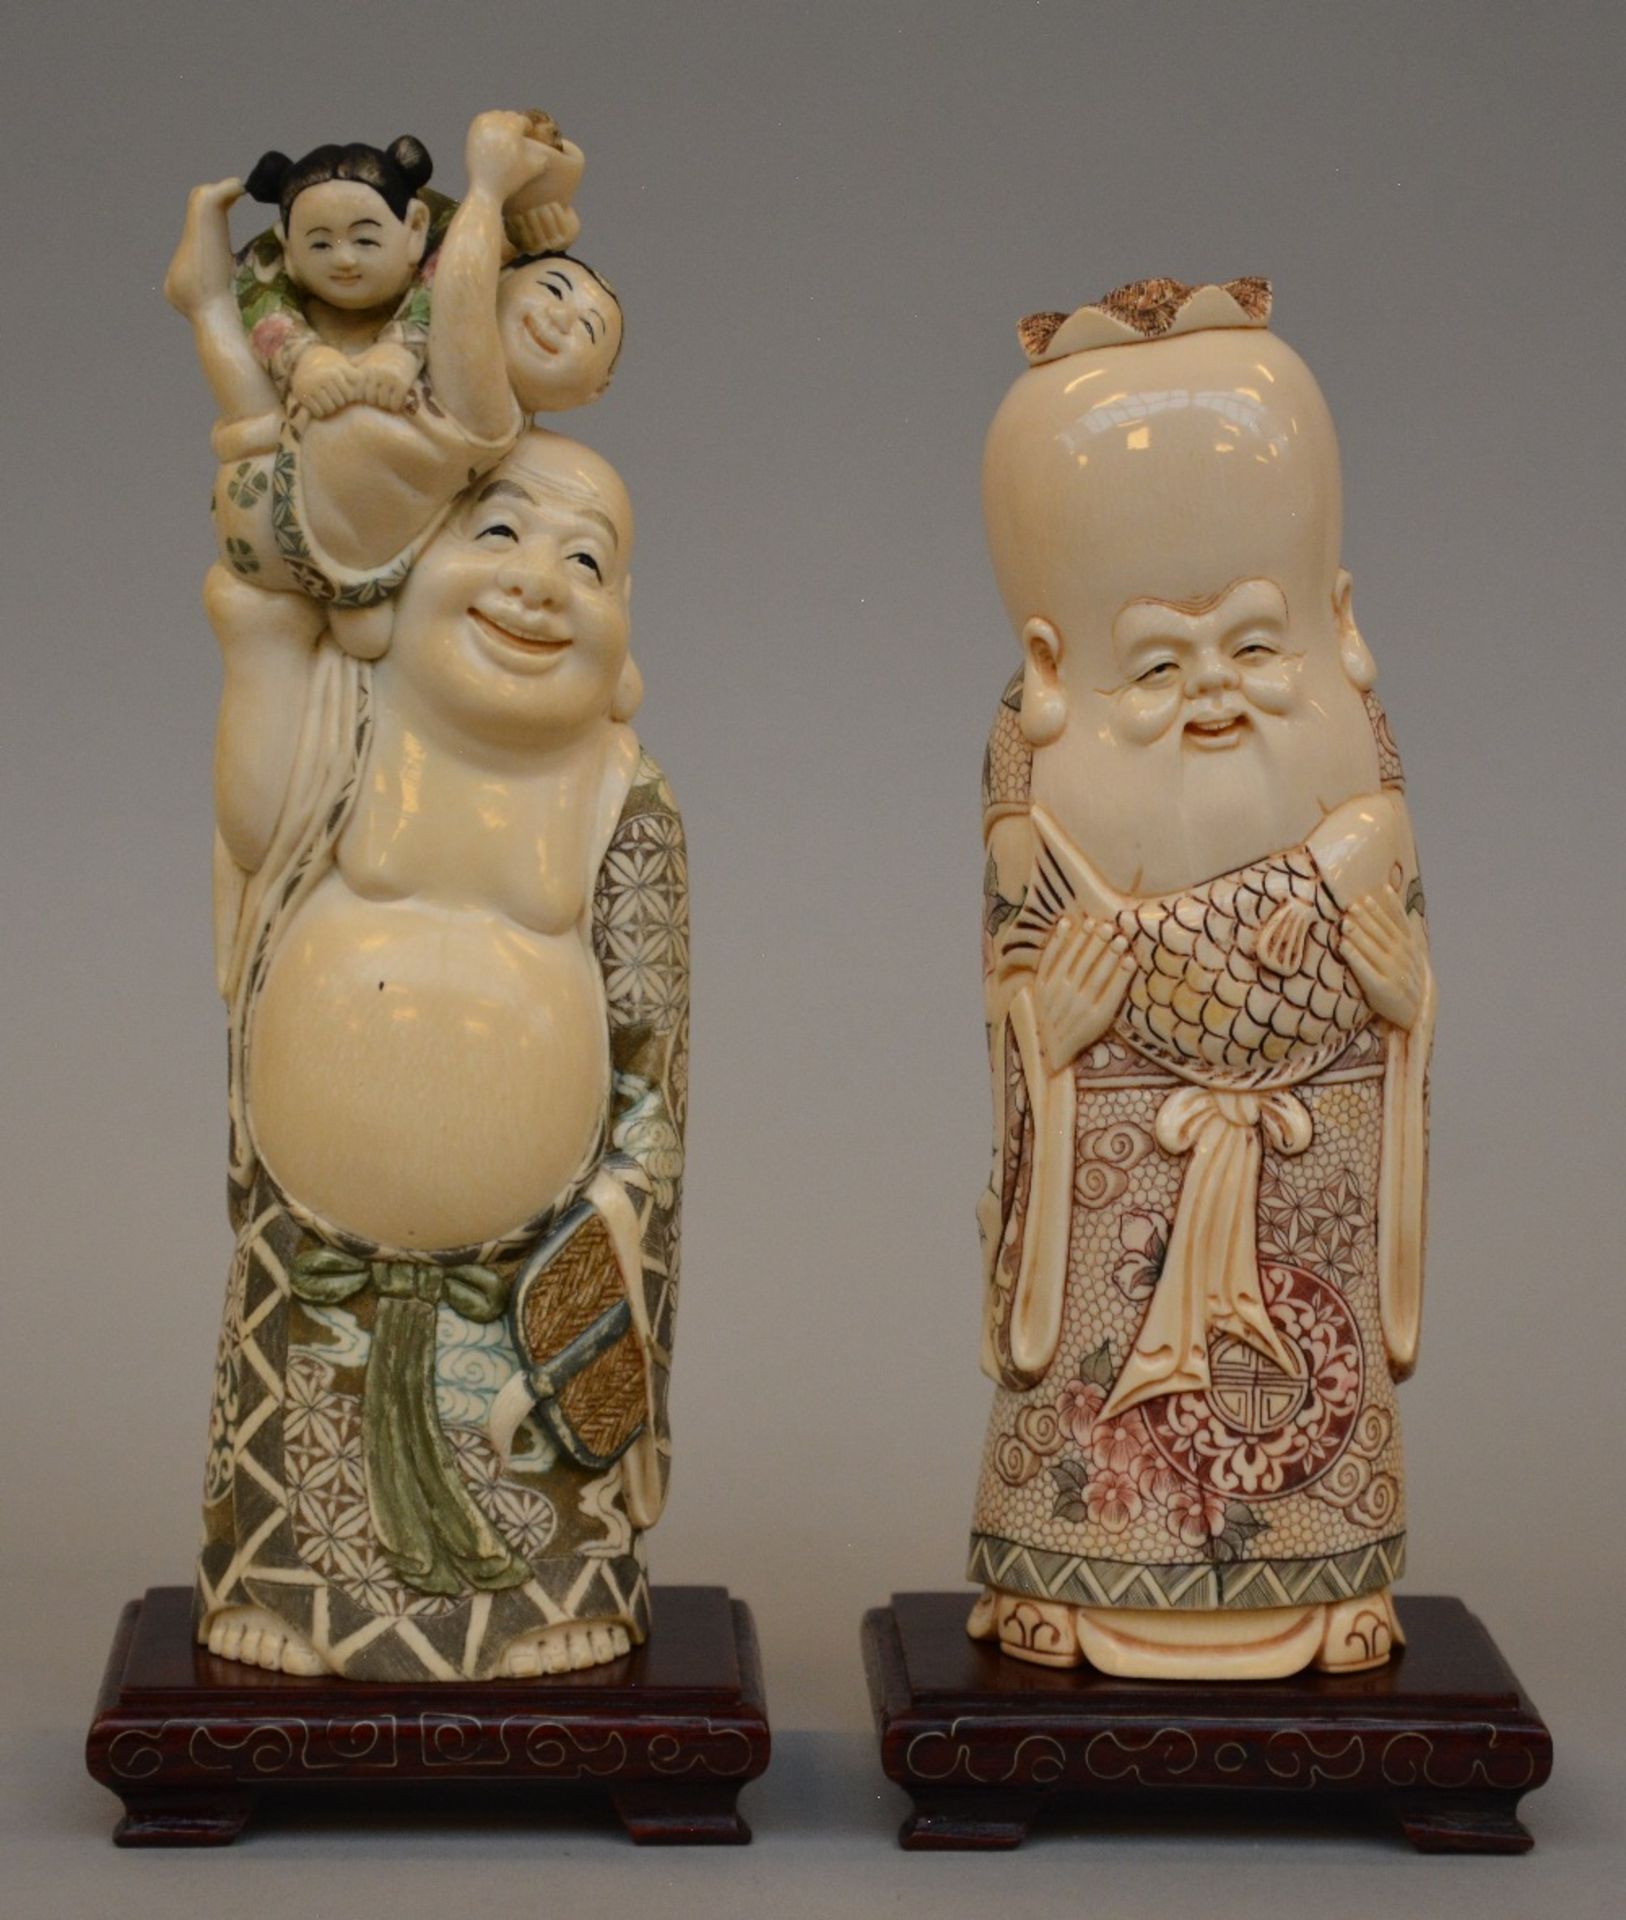 Two Japanese ivory figures on a wooden base depicting the laughing Hotei and Fukurokuju, scrimshaw